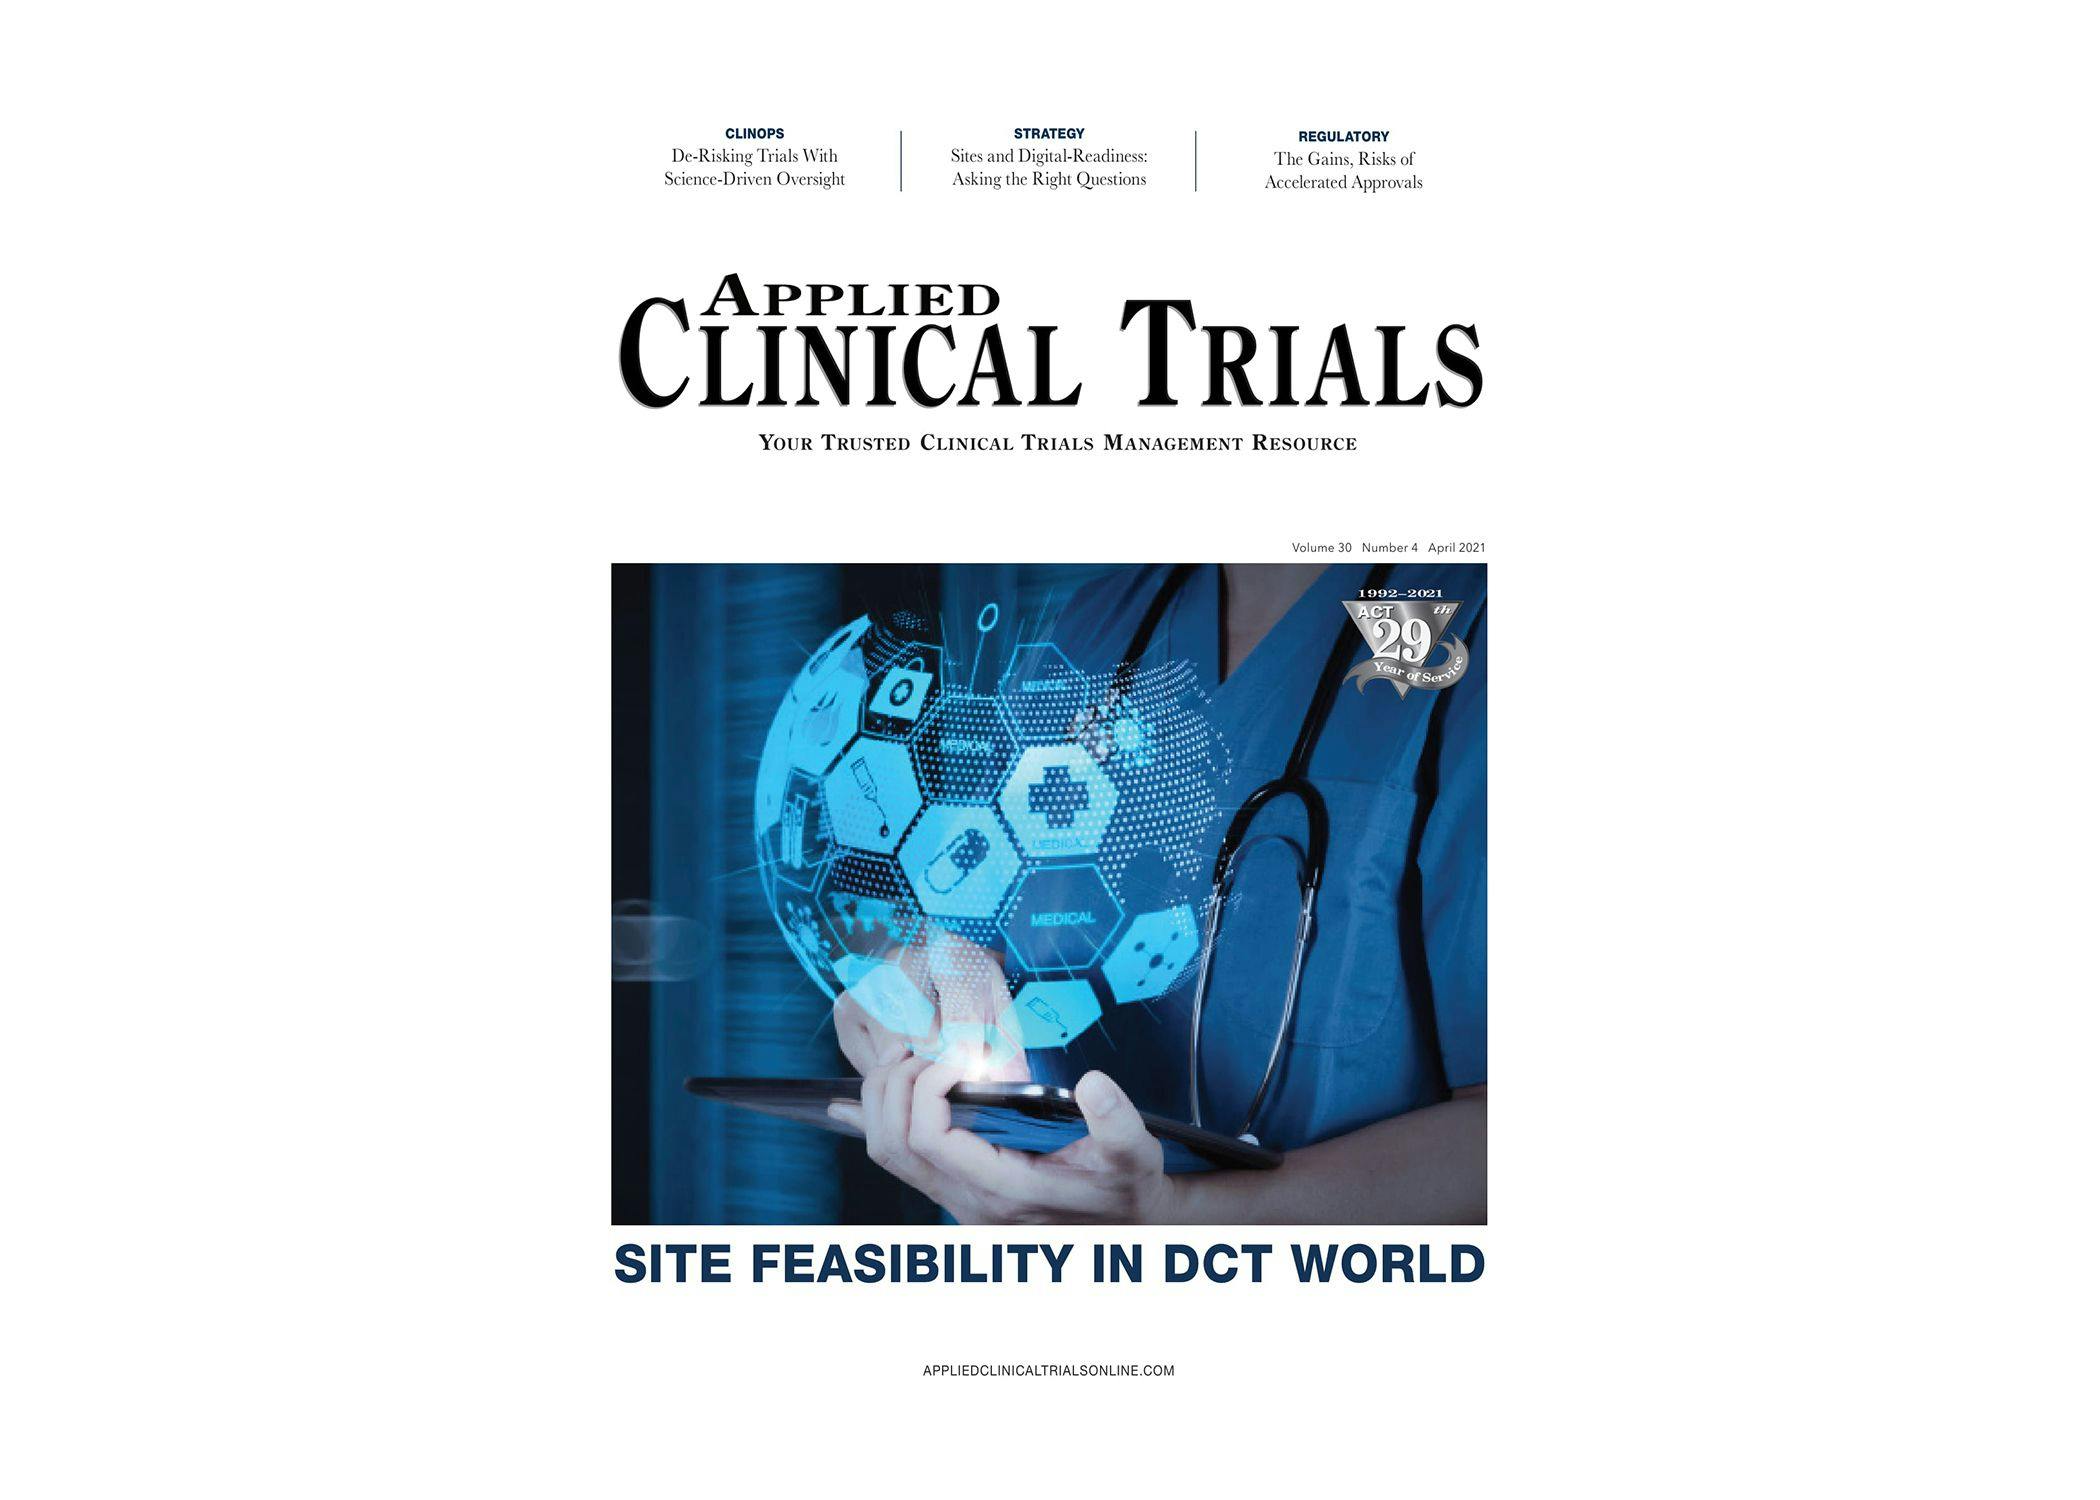 Applied Clinical Trials April 2021 Issue (PDF)